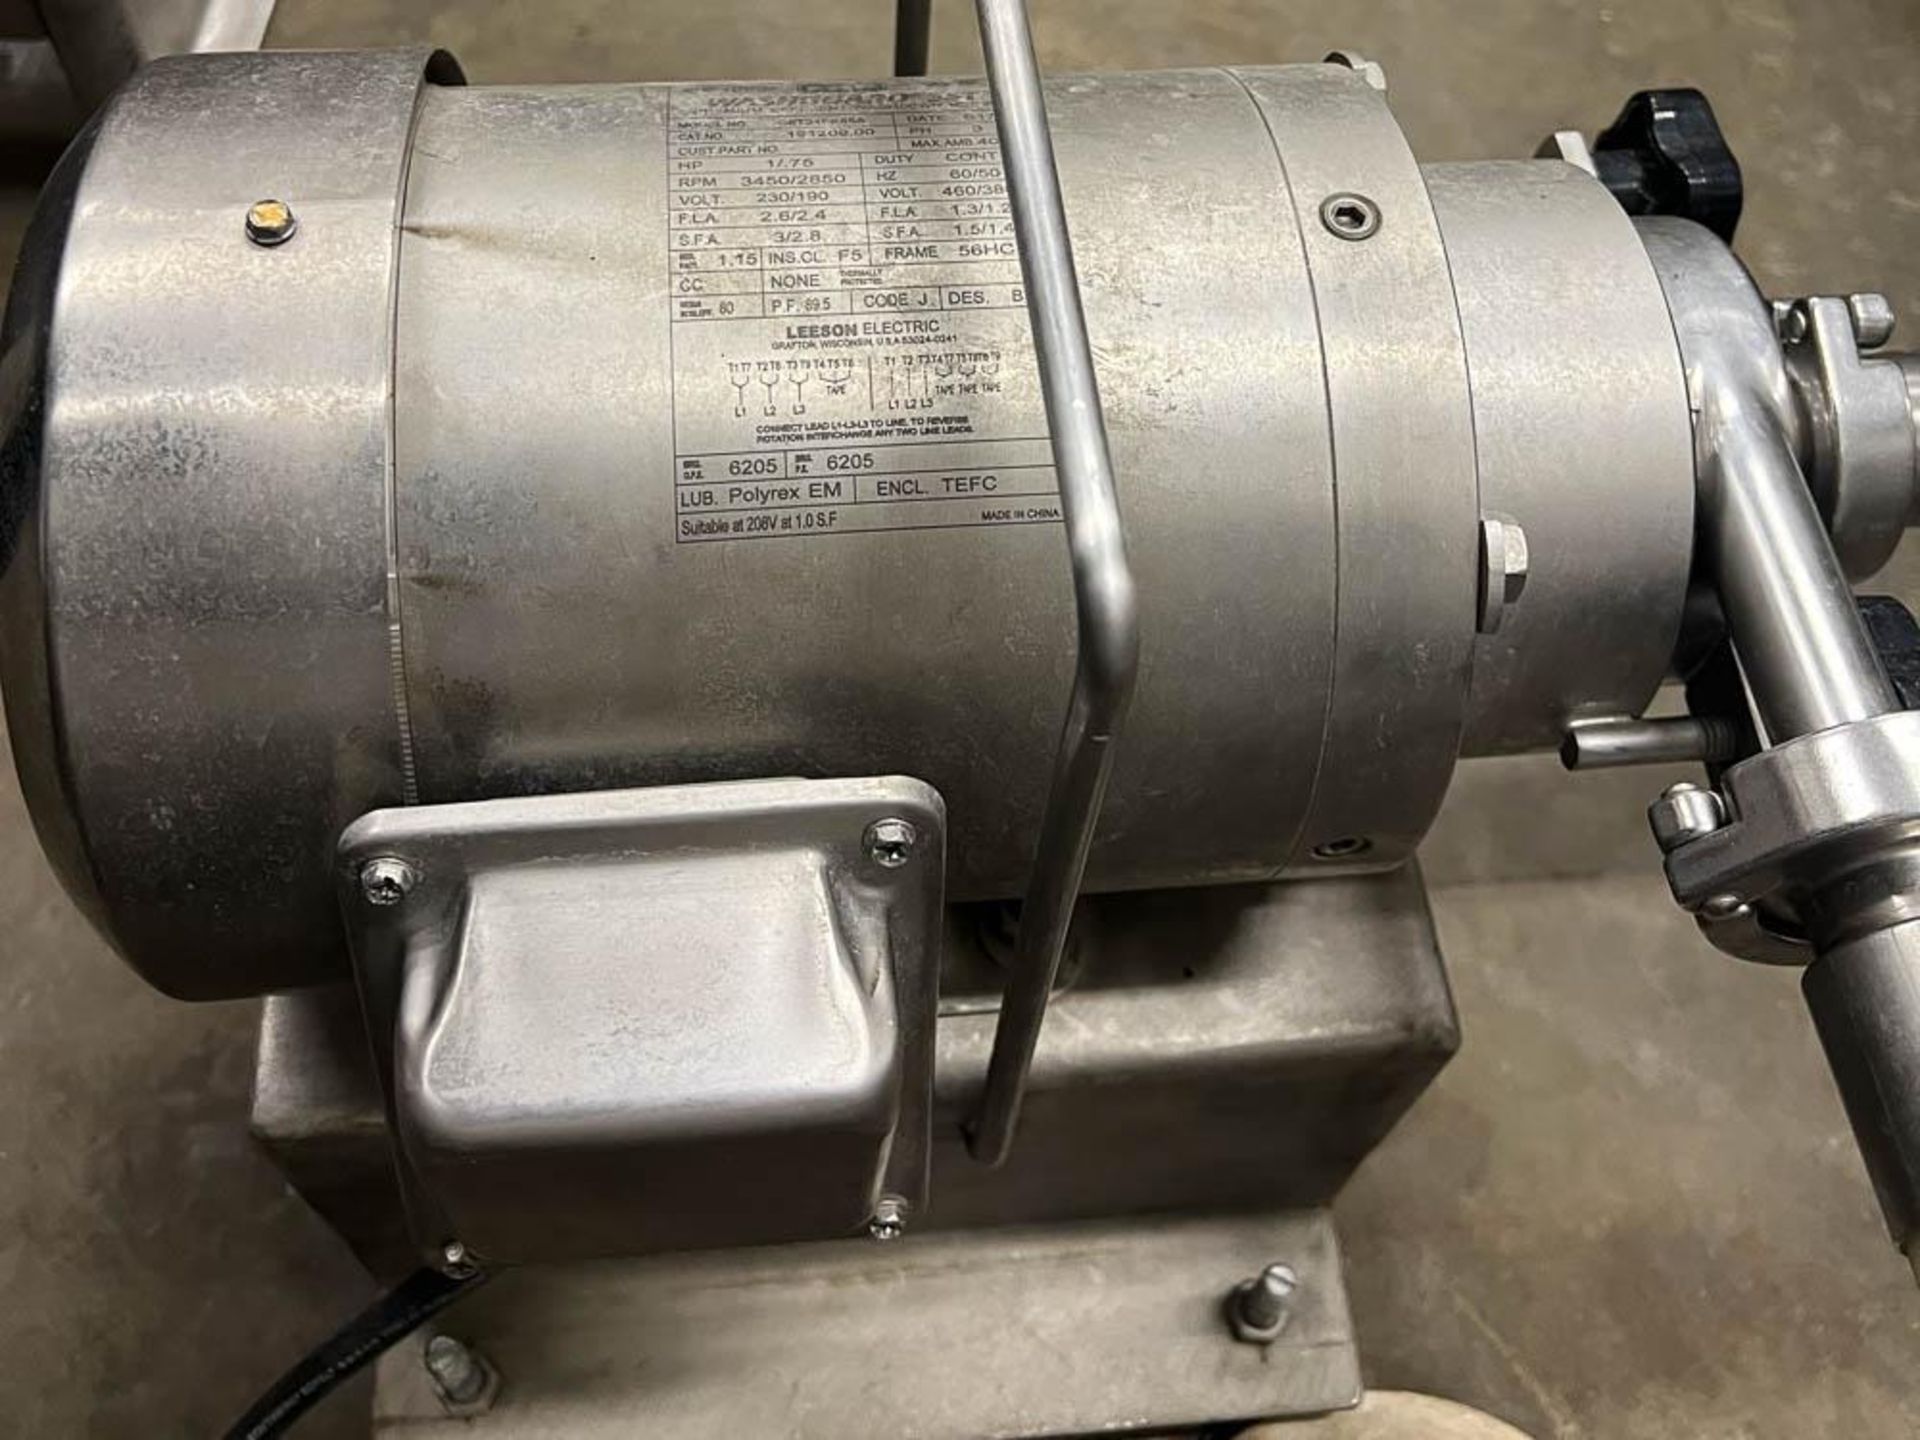 Centrifugal Pump with Leeson 2-Speed 1/.75HP, 3,450/2,850 RPM S/S Motor - Rigging Fee: $100 - Image 2 of 6